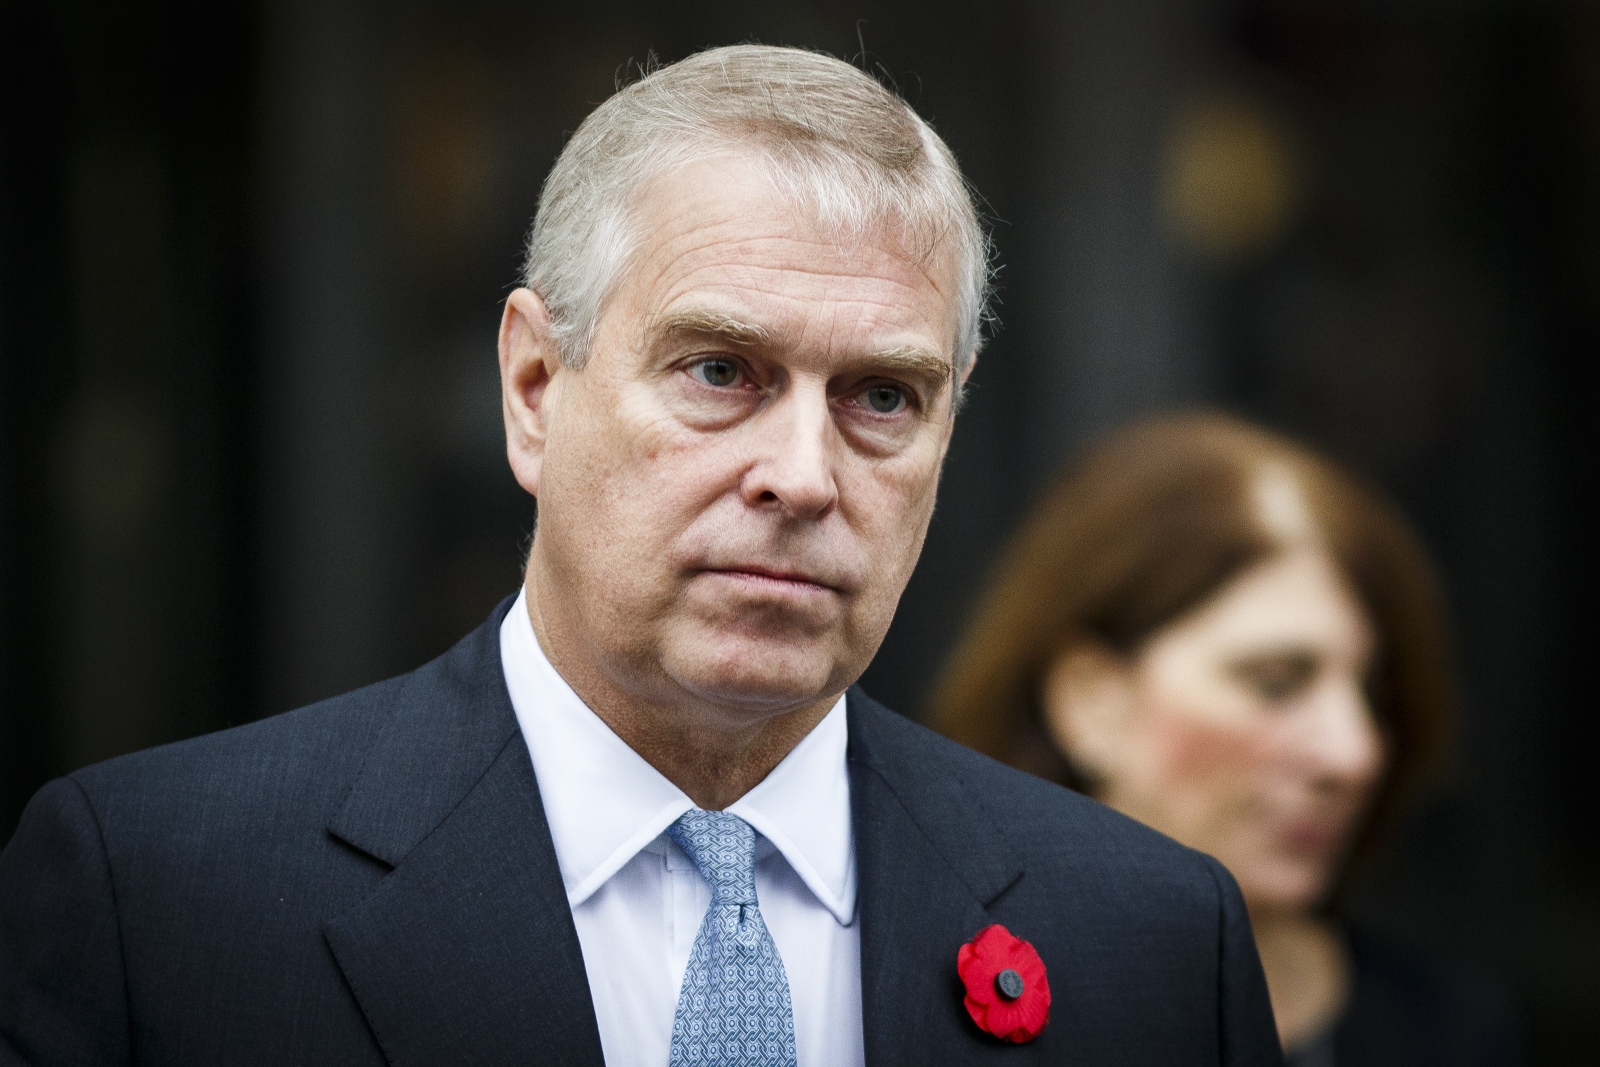 Prince Andrew all smiles as he leaves Balmoral after weeks of hiding thumbnail